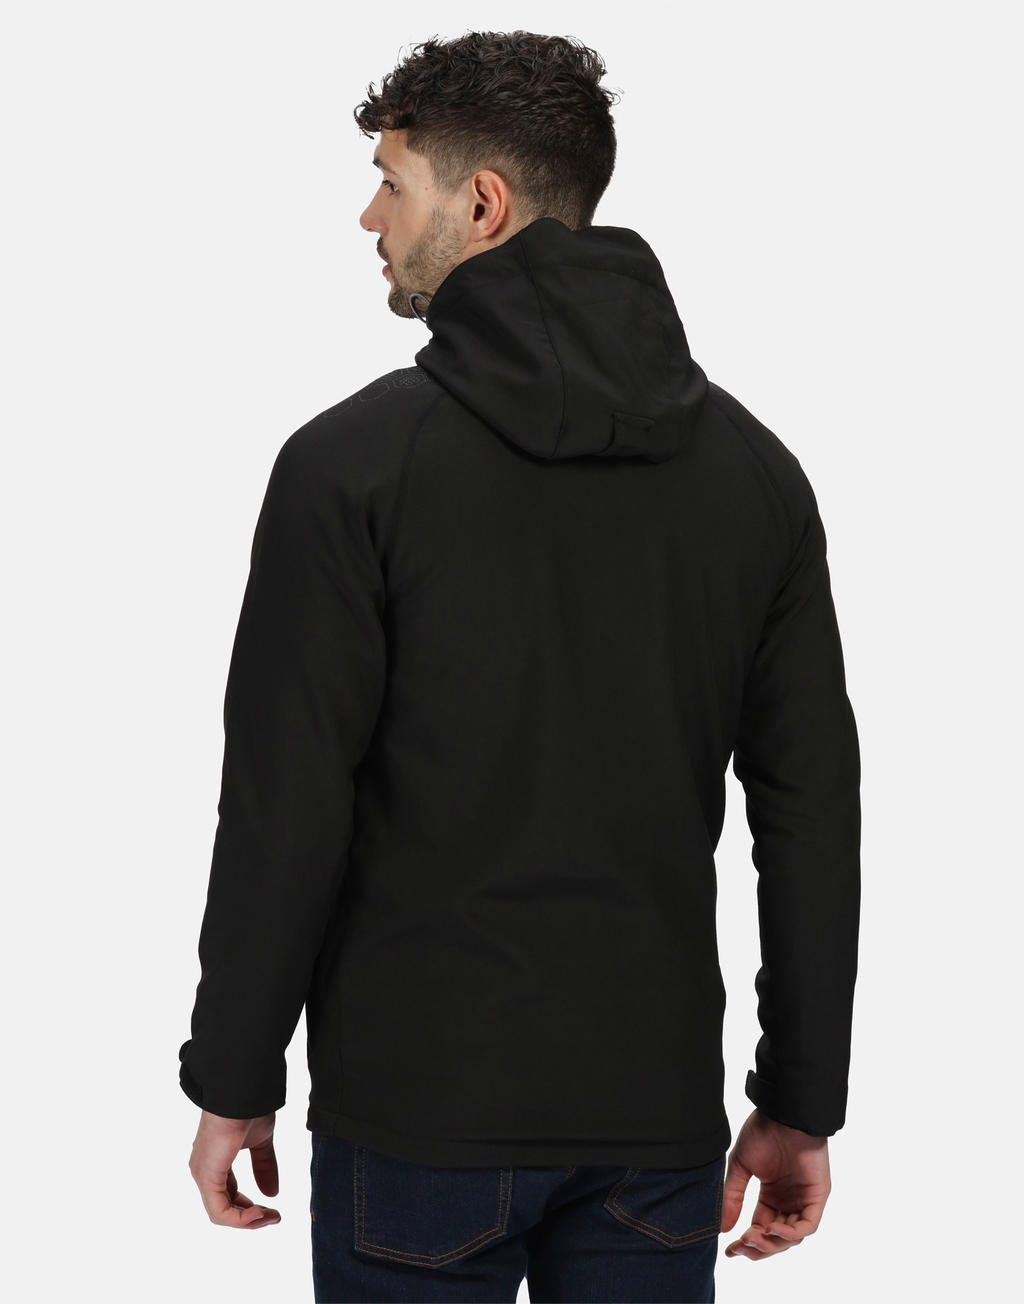  Repeller Lined Hooded Softshell in Farbe Black